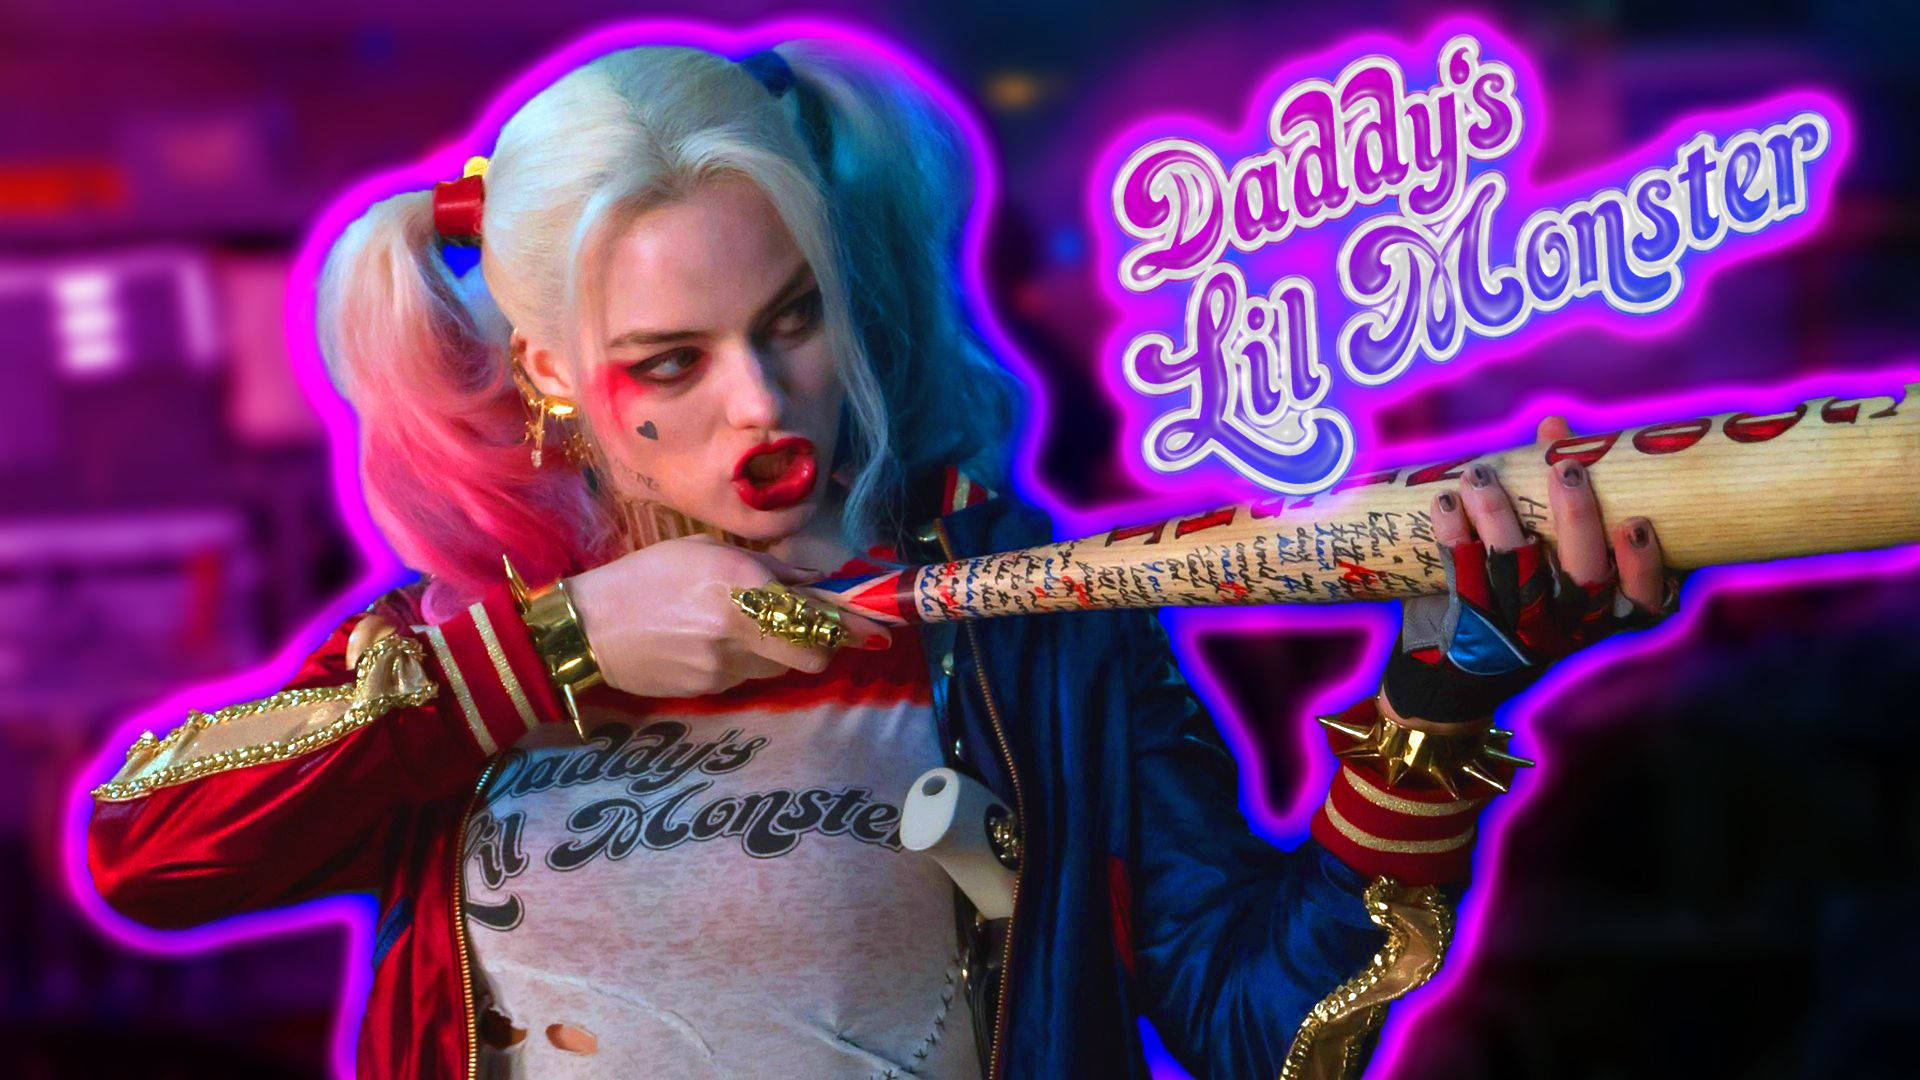 Harley Quinn 1920X1080 Wallpaper and Background Image